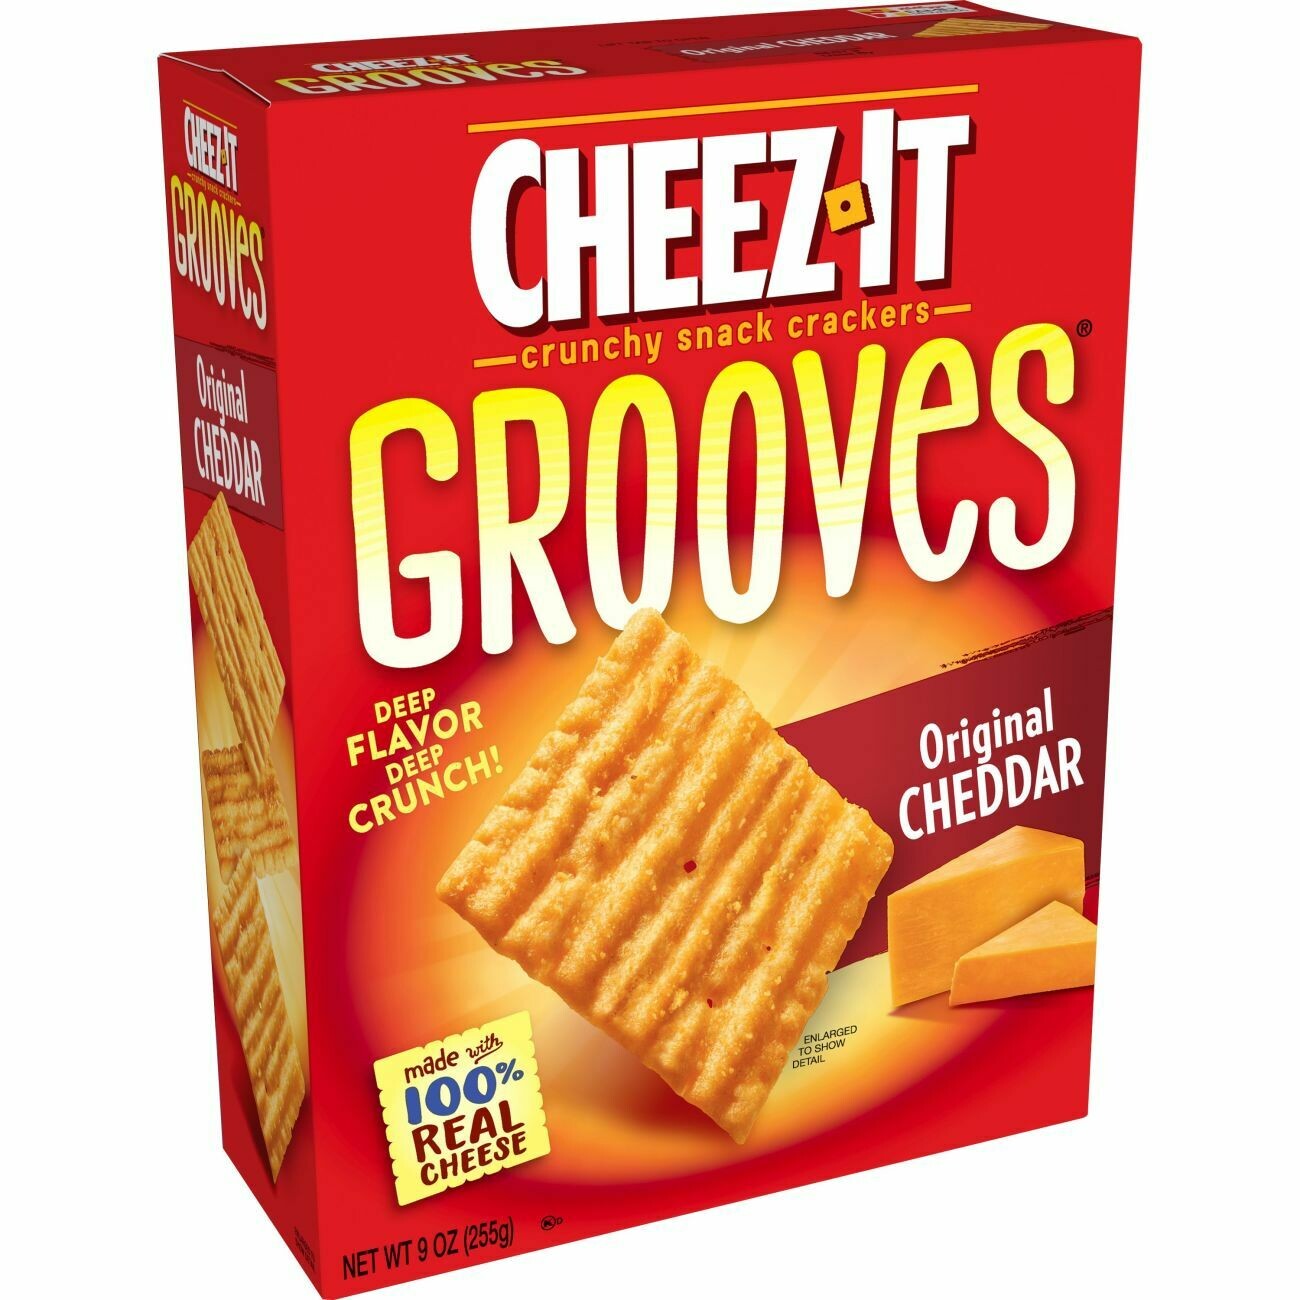 Cheez It Boxes     Grooves Original Cheddar